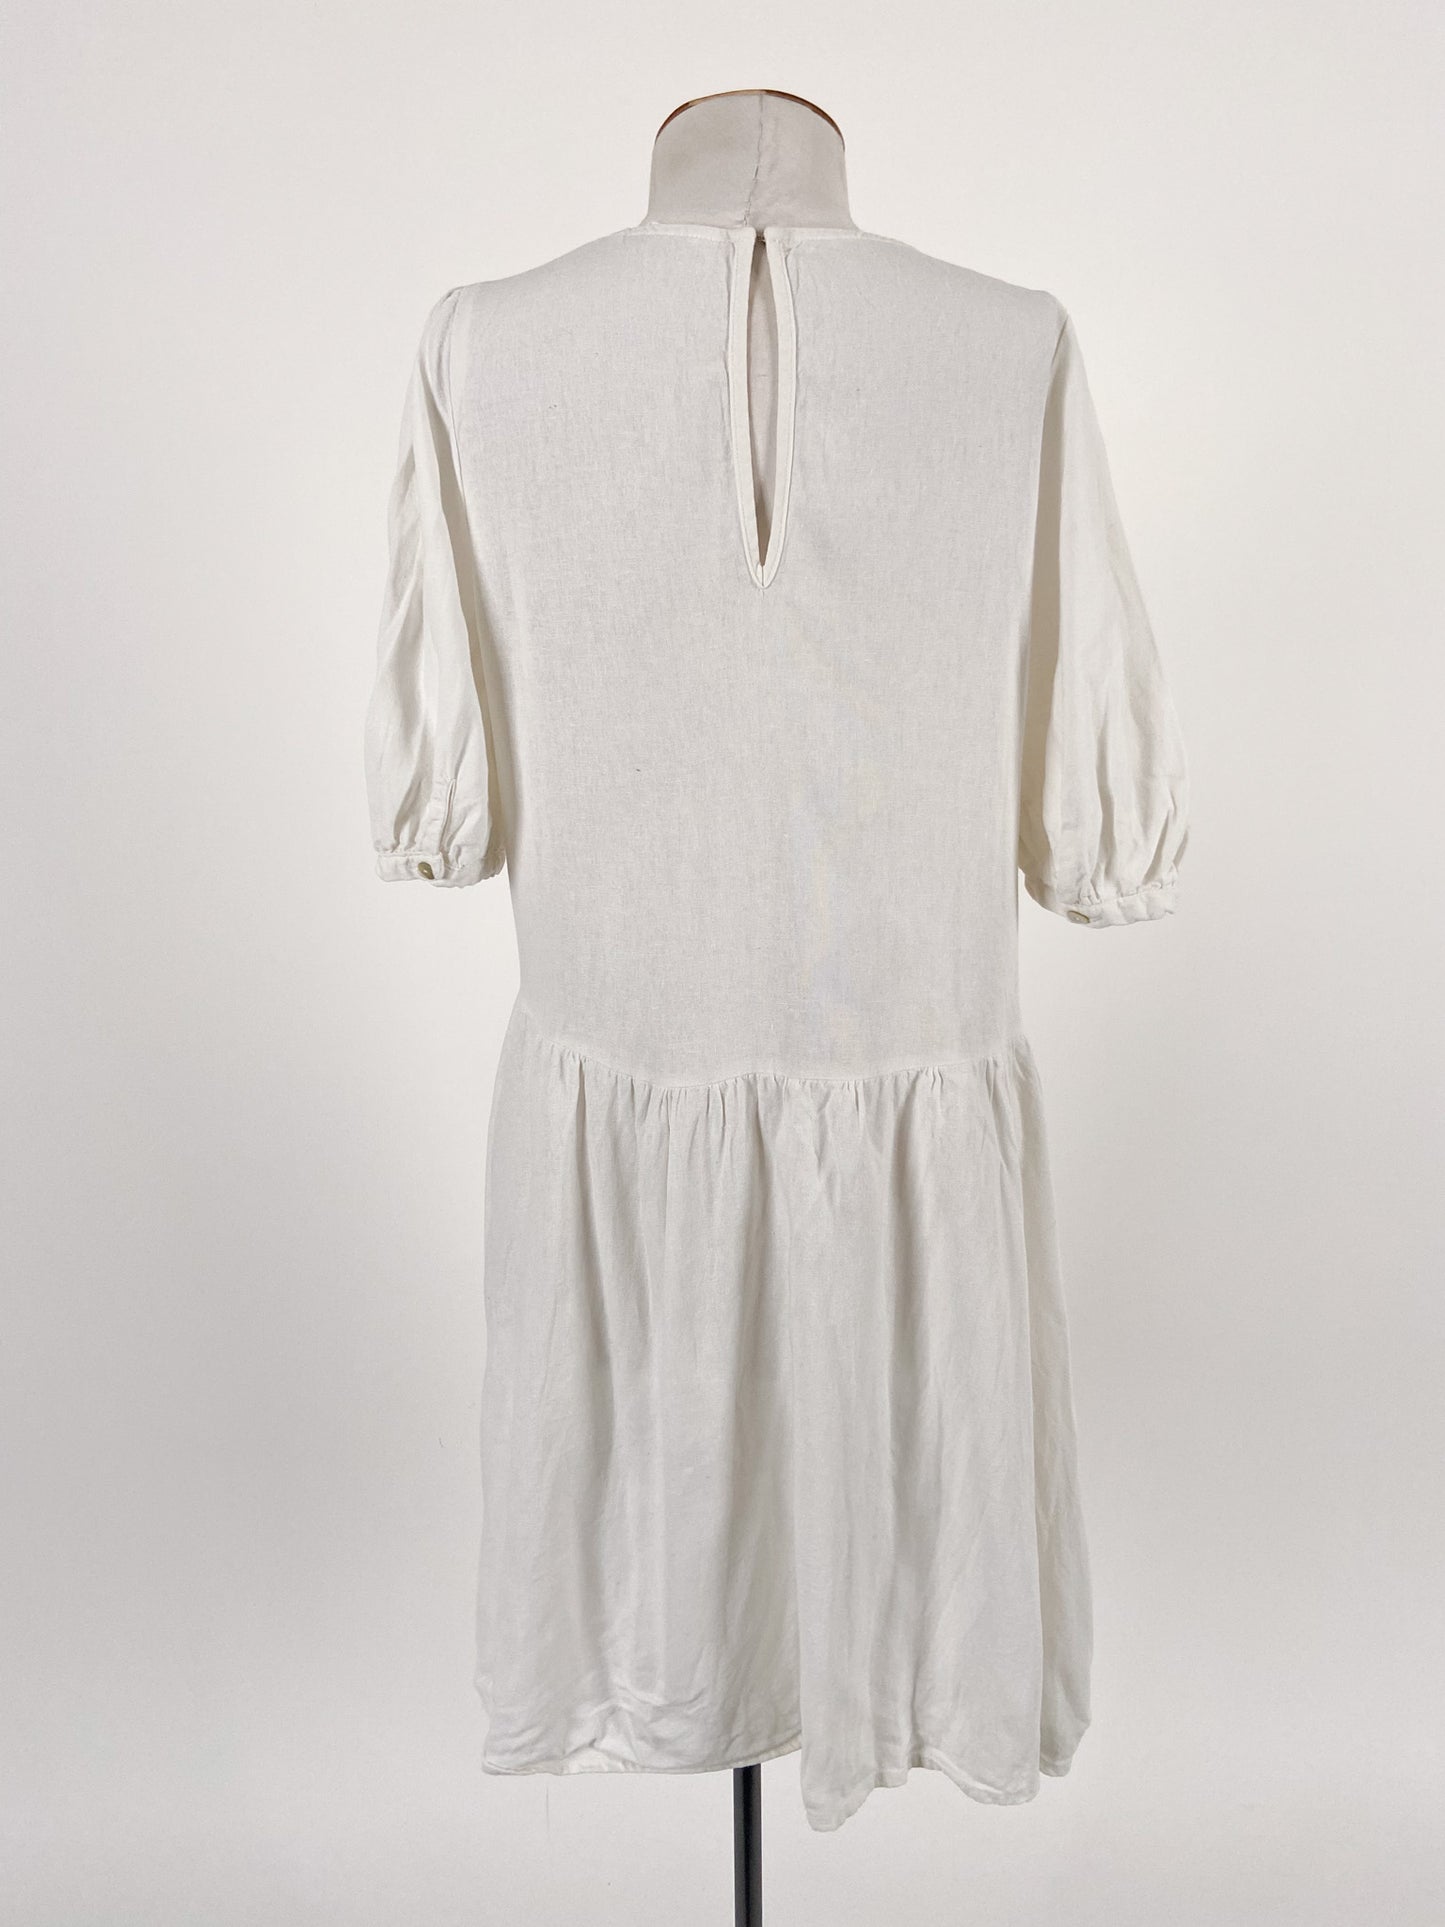 Glassons | White Casual Dress | Size 6